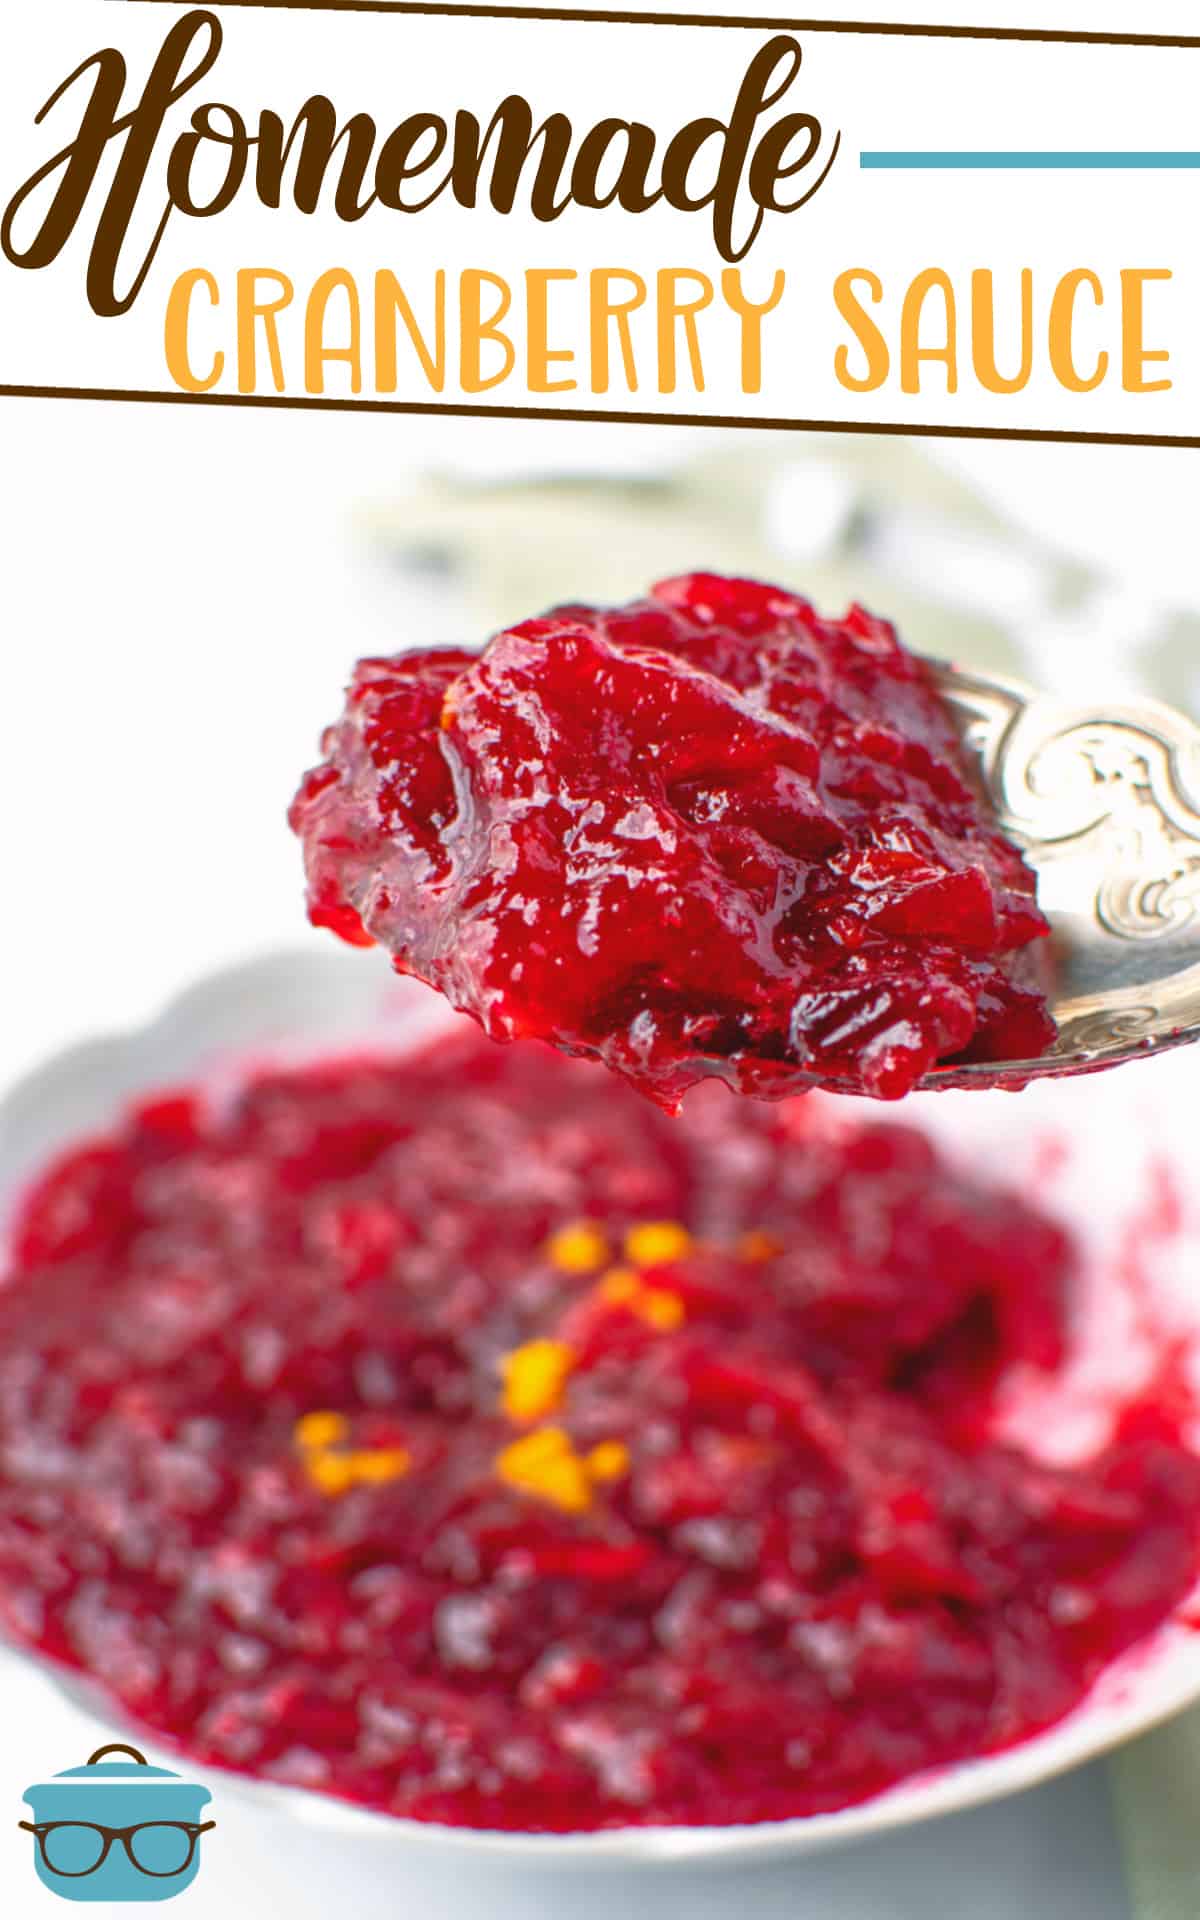 Fresh Homemade Cranberry Sauce recipe from The Country Cook, shown in a bow and a spoon scooping out a serving.